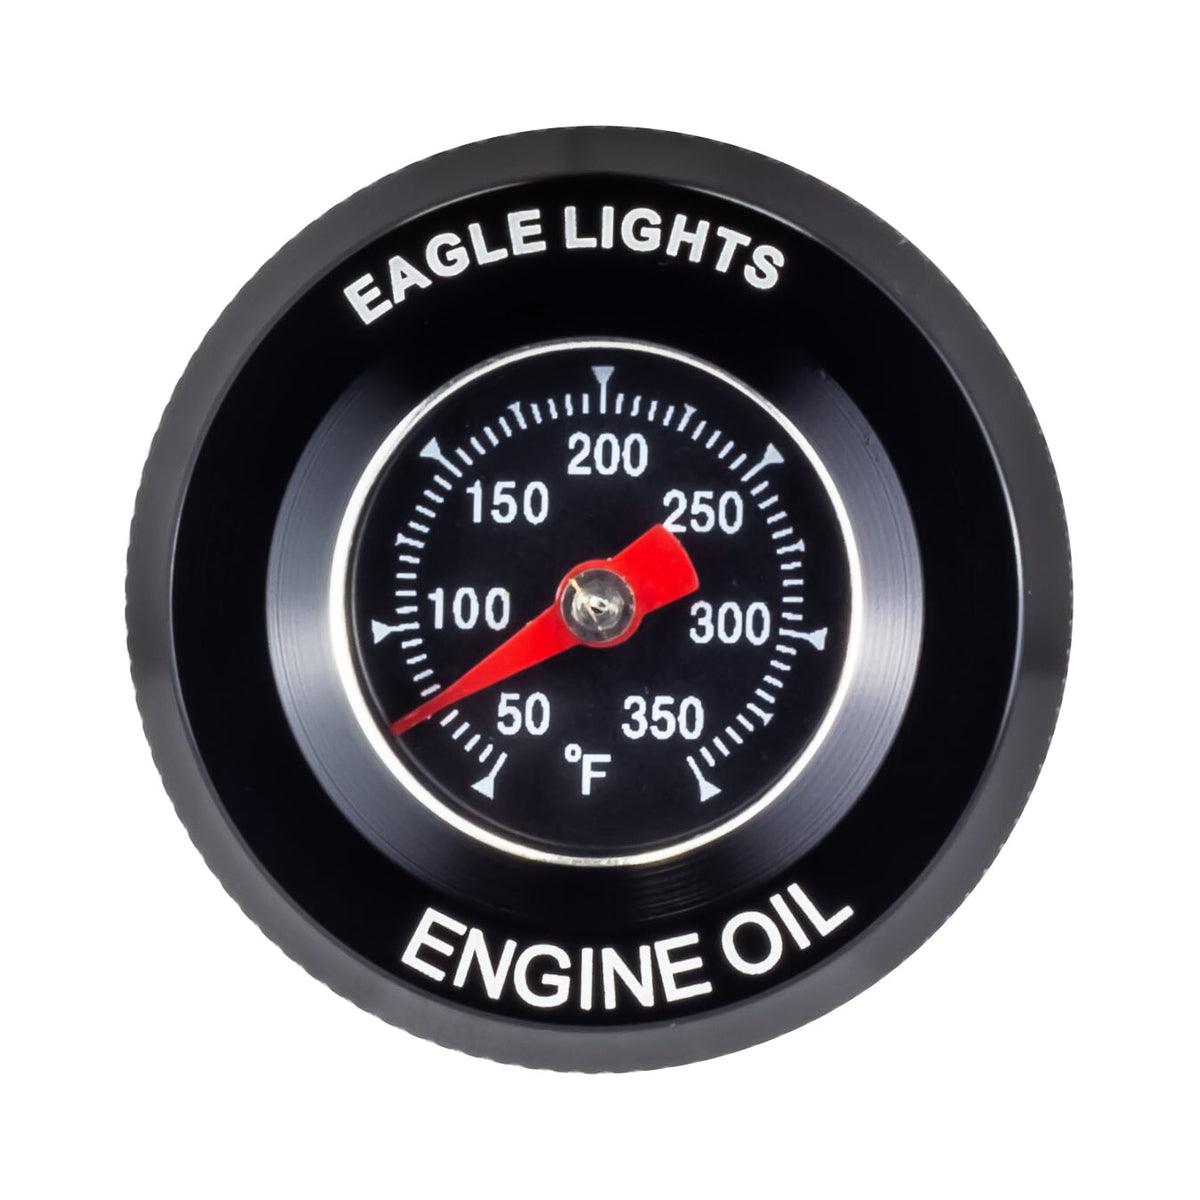 Eagle Lights TEMPSENSE Precision Dipstick with Temperature Gauge for 2018+ Harley Davidson Motorcycles Softail Models